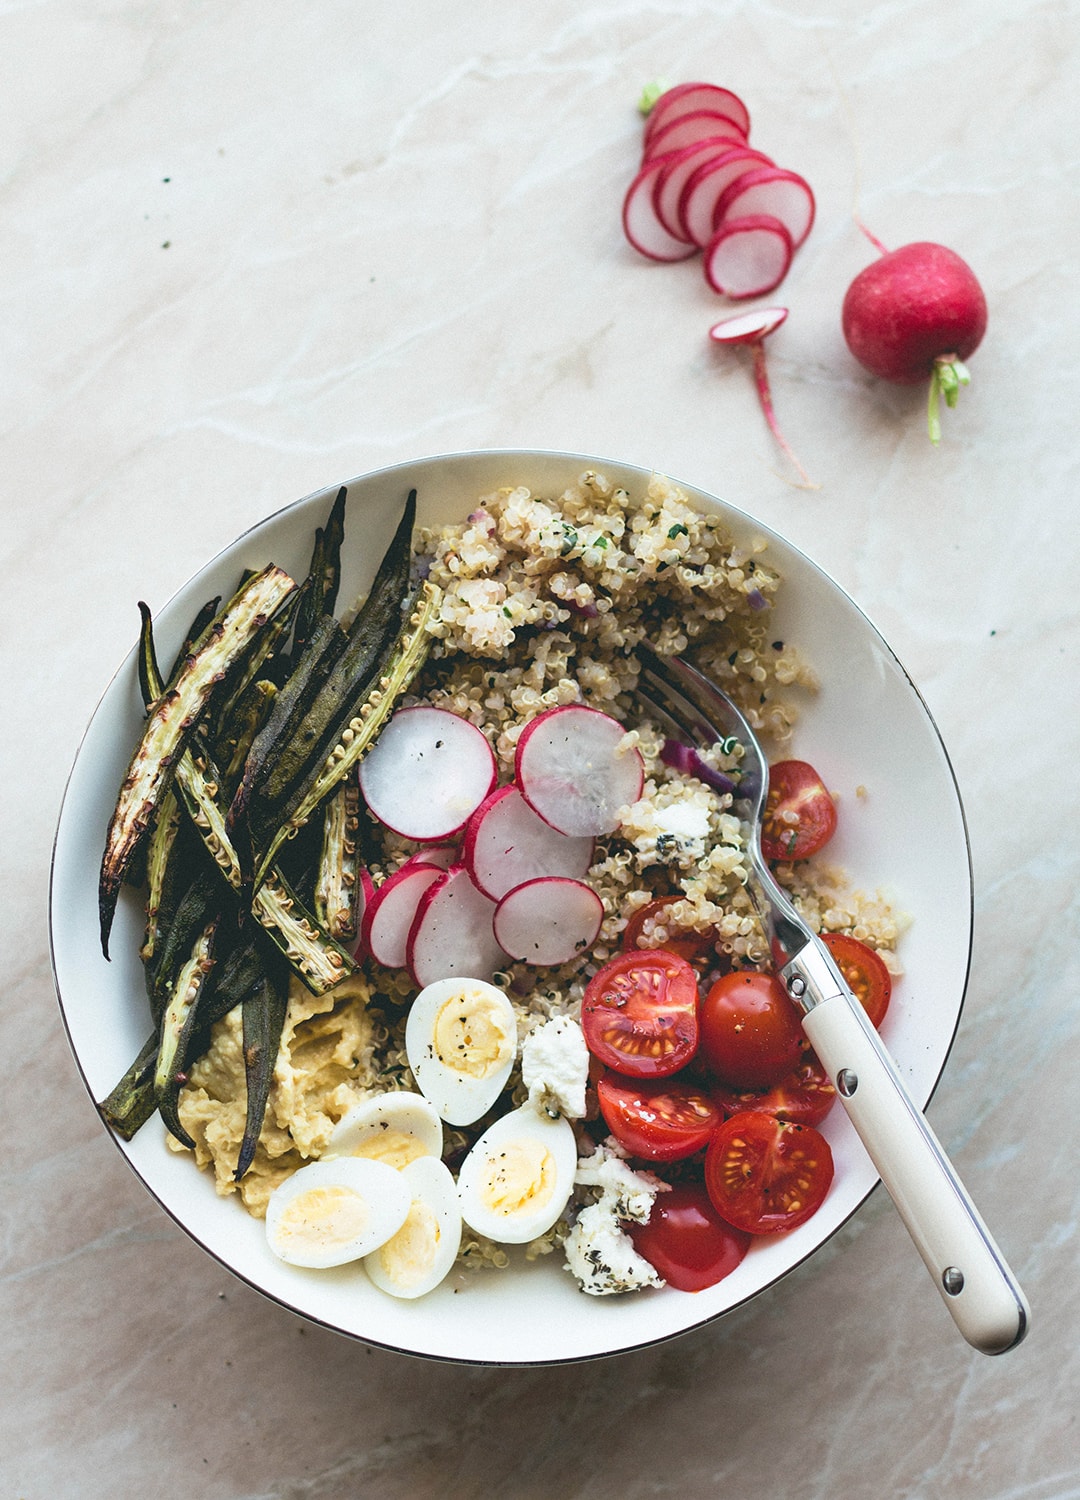 Roasted Okra, Quail Eggs, and Herbed Quinoa Bowl (vegetarian) - because bowl food is the best! Easy to make and really good for lunch, dinner or even breakfast! | thehealthfulideas.com